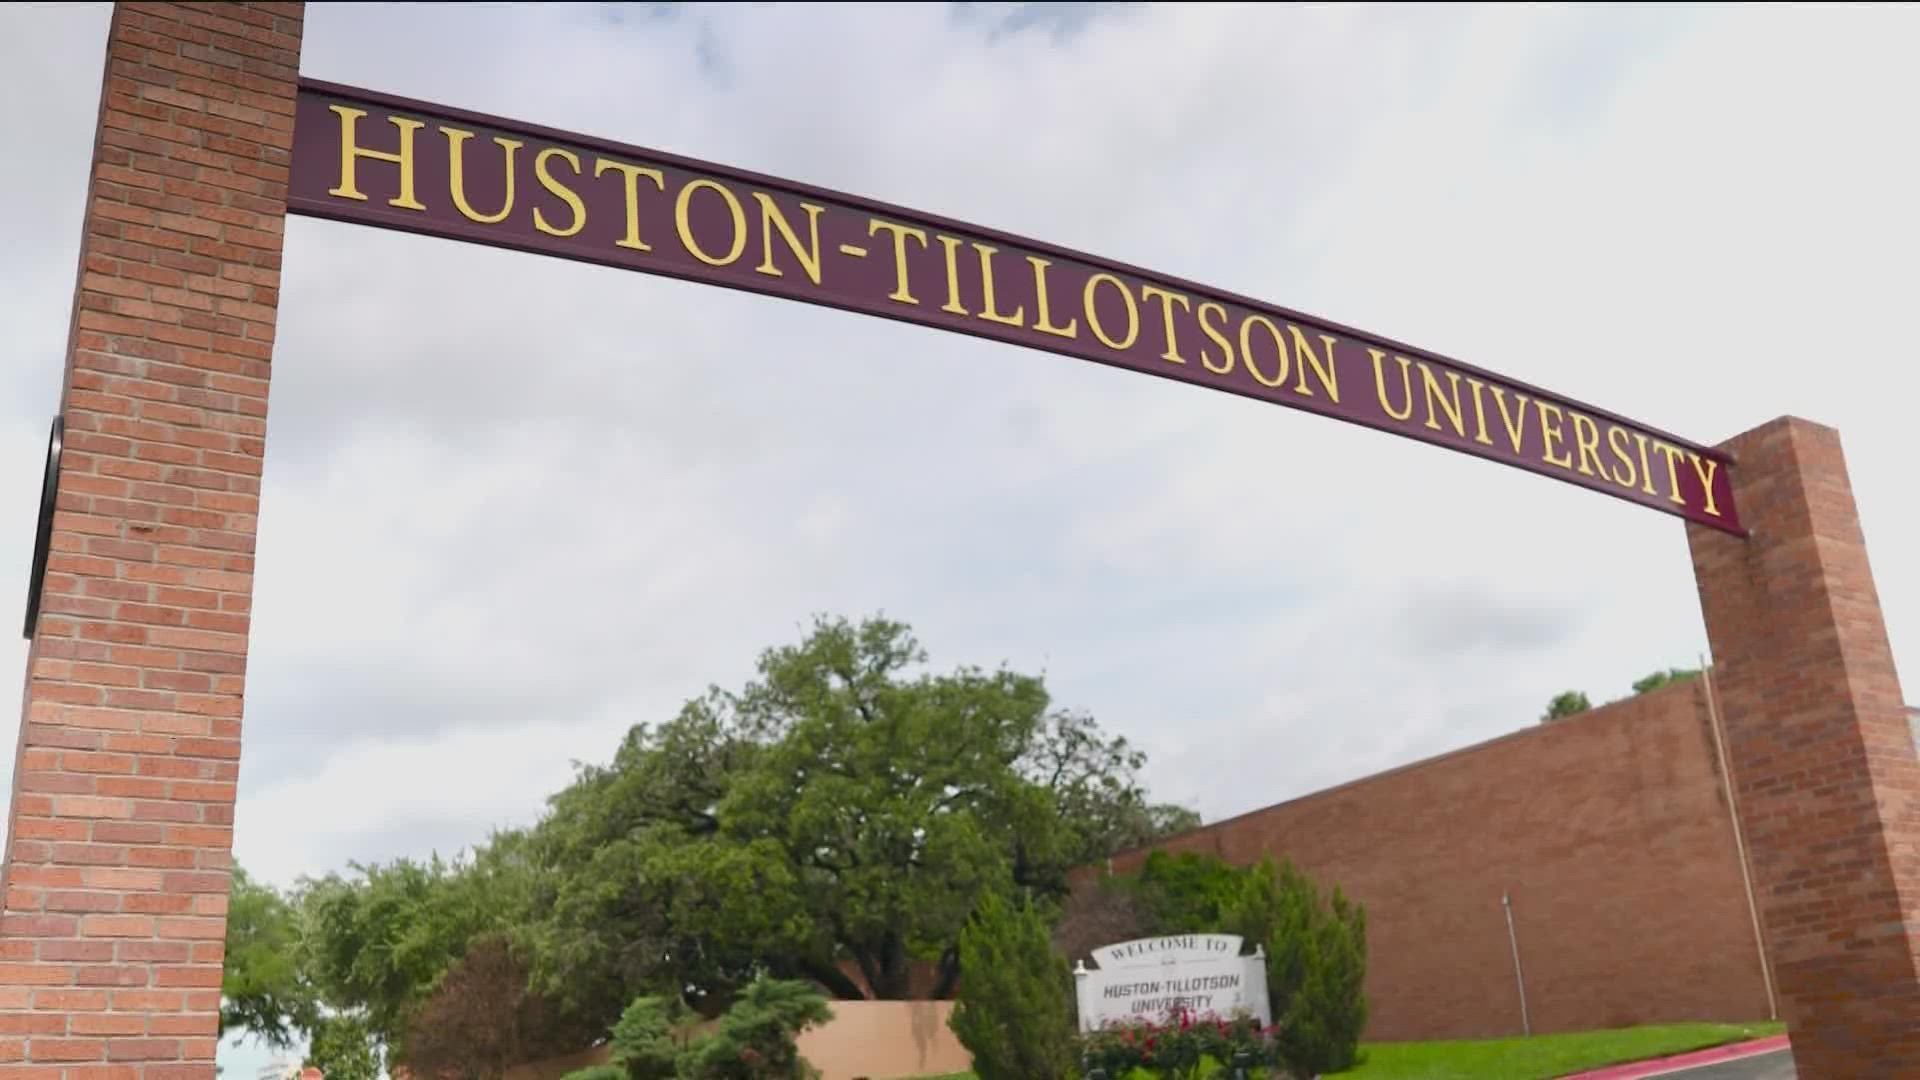 HustonTillotson joins National Register of Historic Places